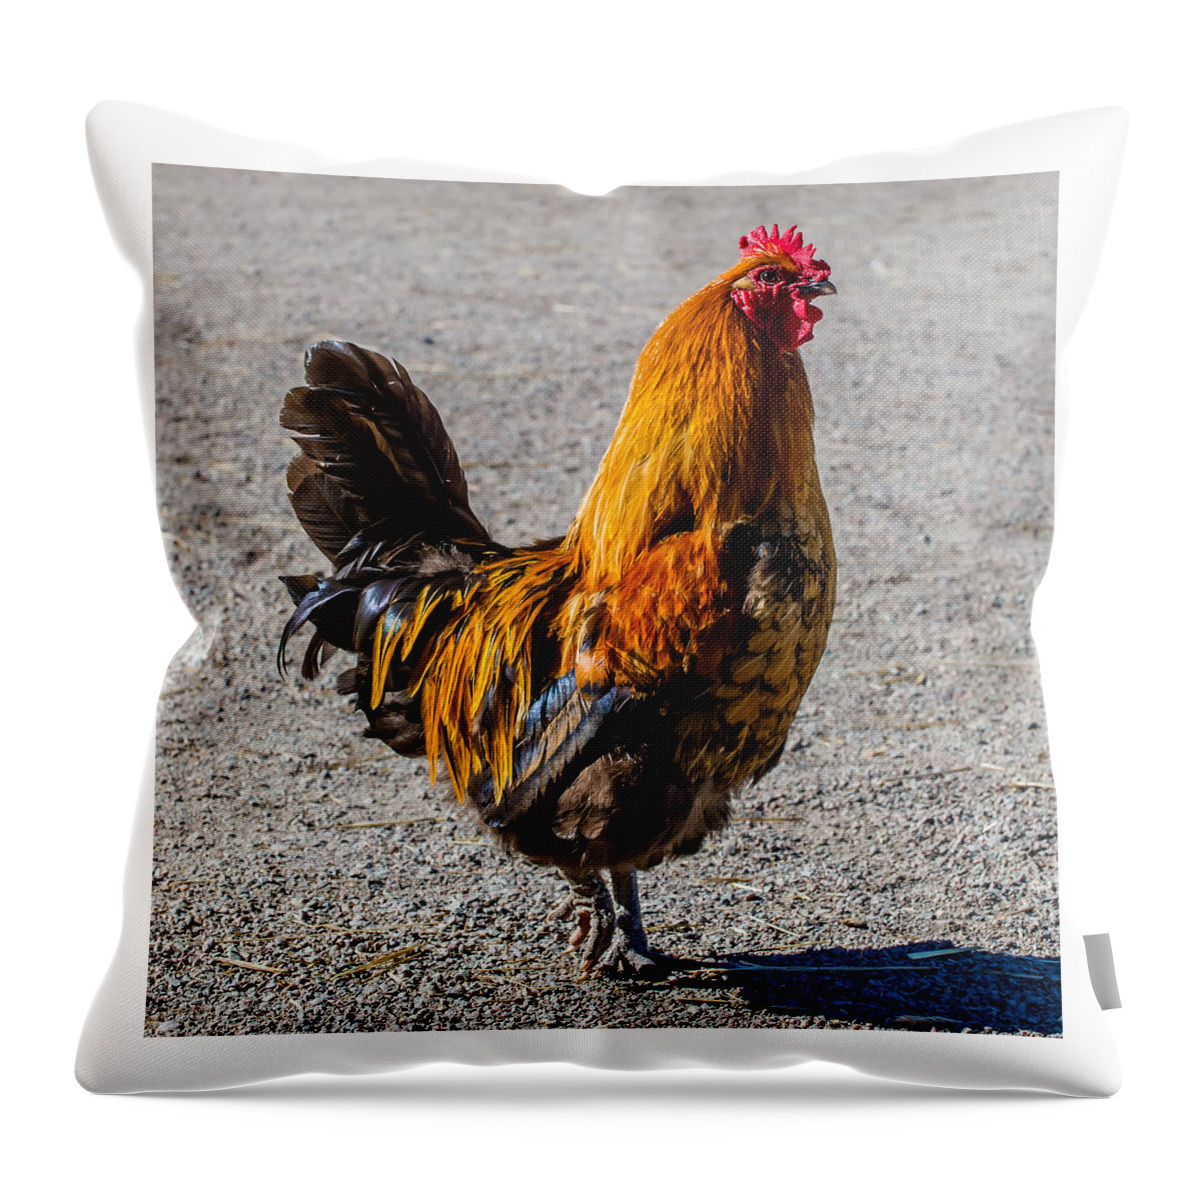 Rooster Throw Pillow featuring the photograph Rooster by Torbjorn Swenelius